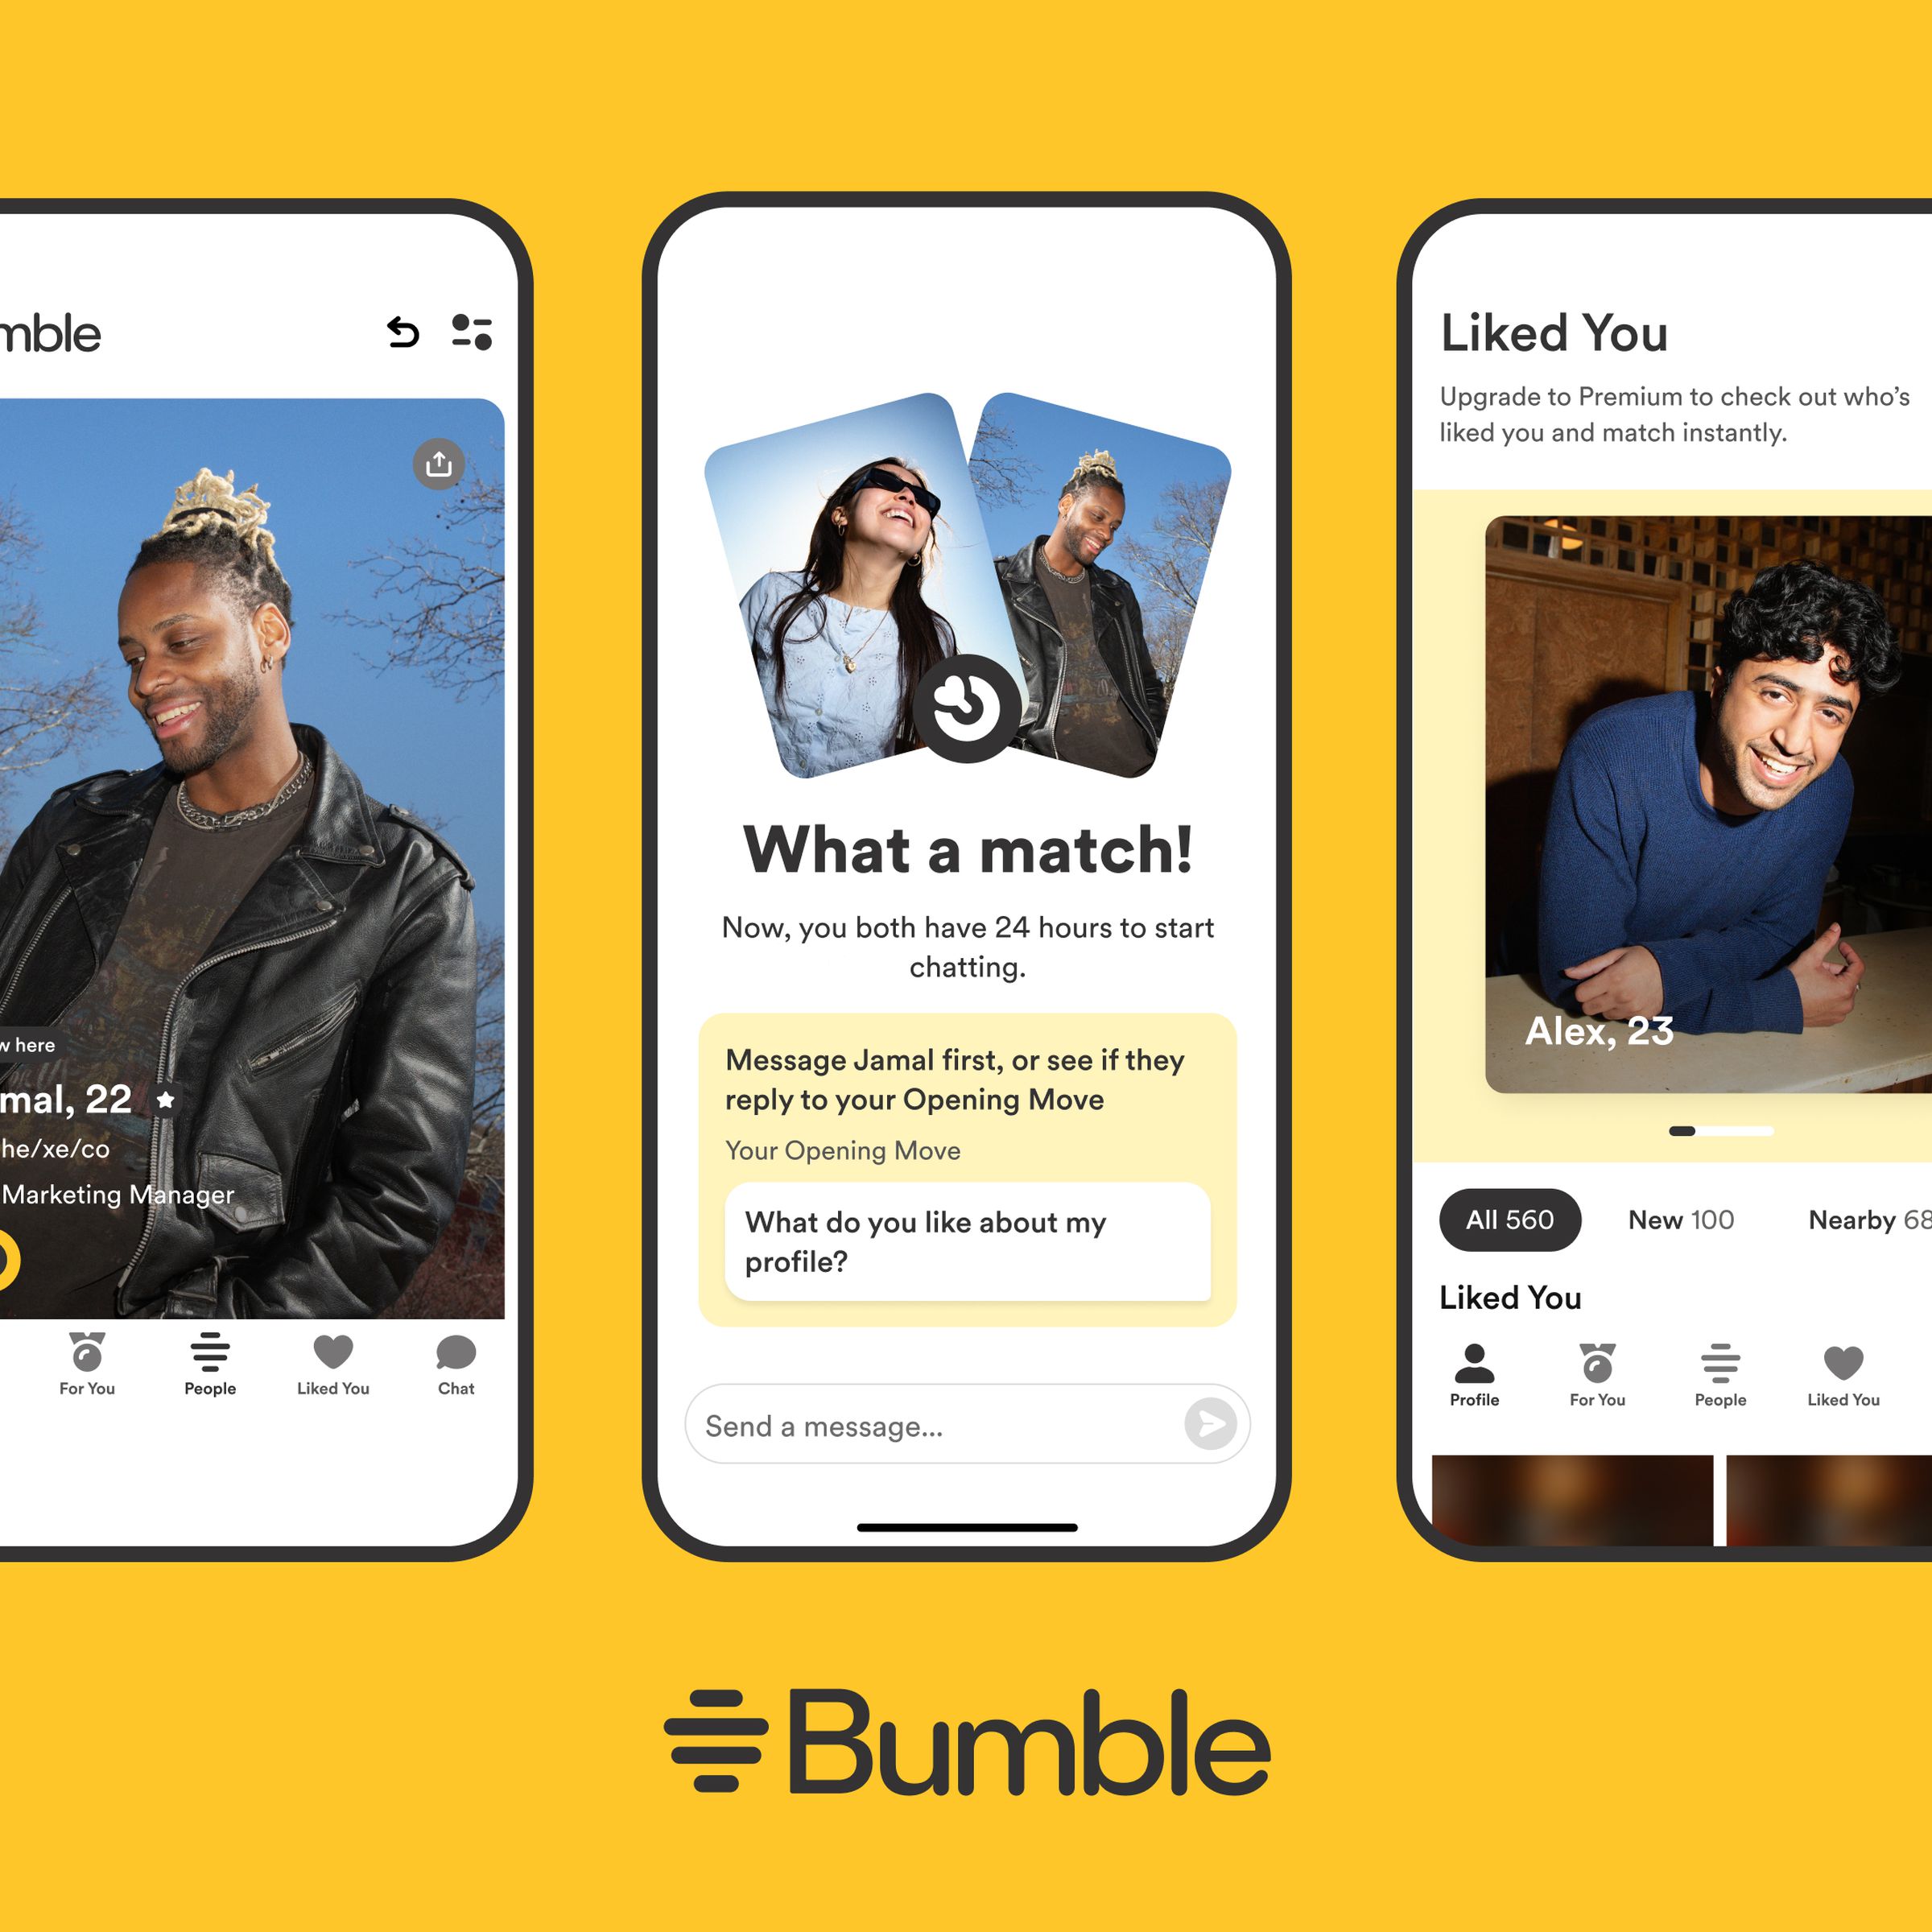 A series of three images showing Bumble’s redesigned app